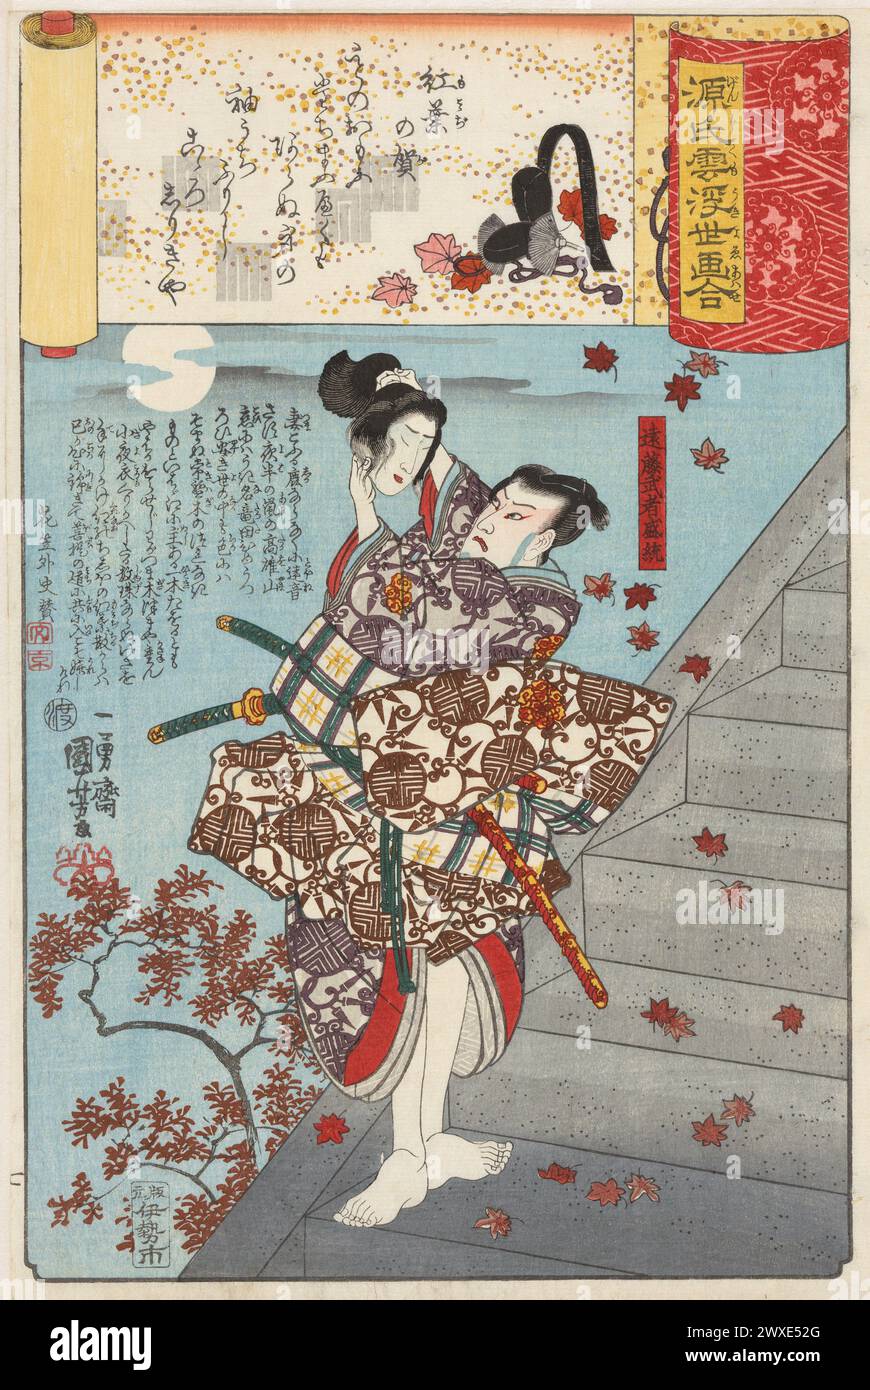 Nineteenth century Japanese printed woodcut  by Kunisada Utagawa- Samurai Endo Morit™ with the head of Kesa Gozen Genji kumo ukiyo e awase    Description Samurai End™ Musha Morit™ stands on the stone steps to the Jigan temple with the head of his beloved Kesa Gozen in his hands. Kesa Gozen was married to another man and Ed™ Morit™ decides to kill this man in his sleep. As a faithful wife, Kesa Gozen takes her husband's place, after which Ed™ Morit™, who is unaware of this, kills his lover. This becomes clear to him the next morning. Stock Photo